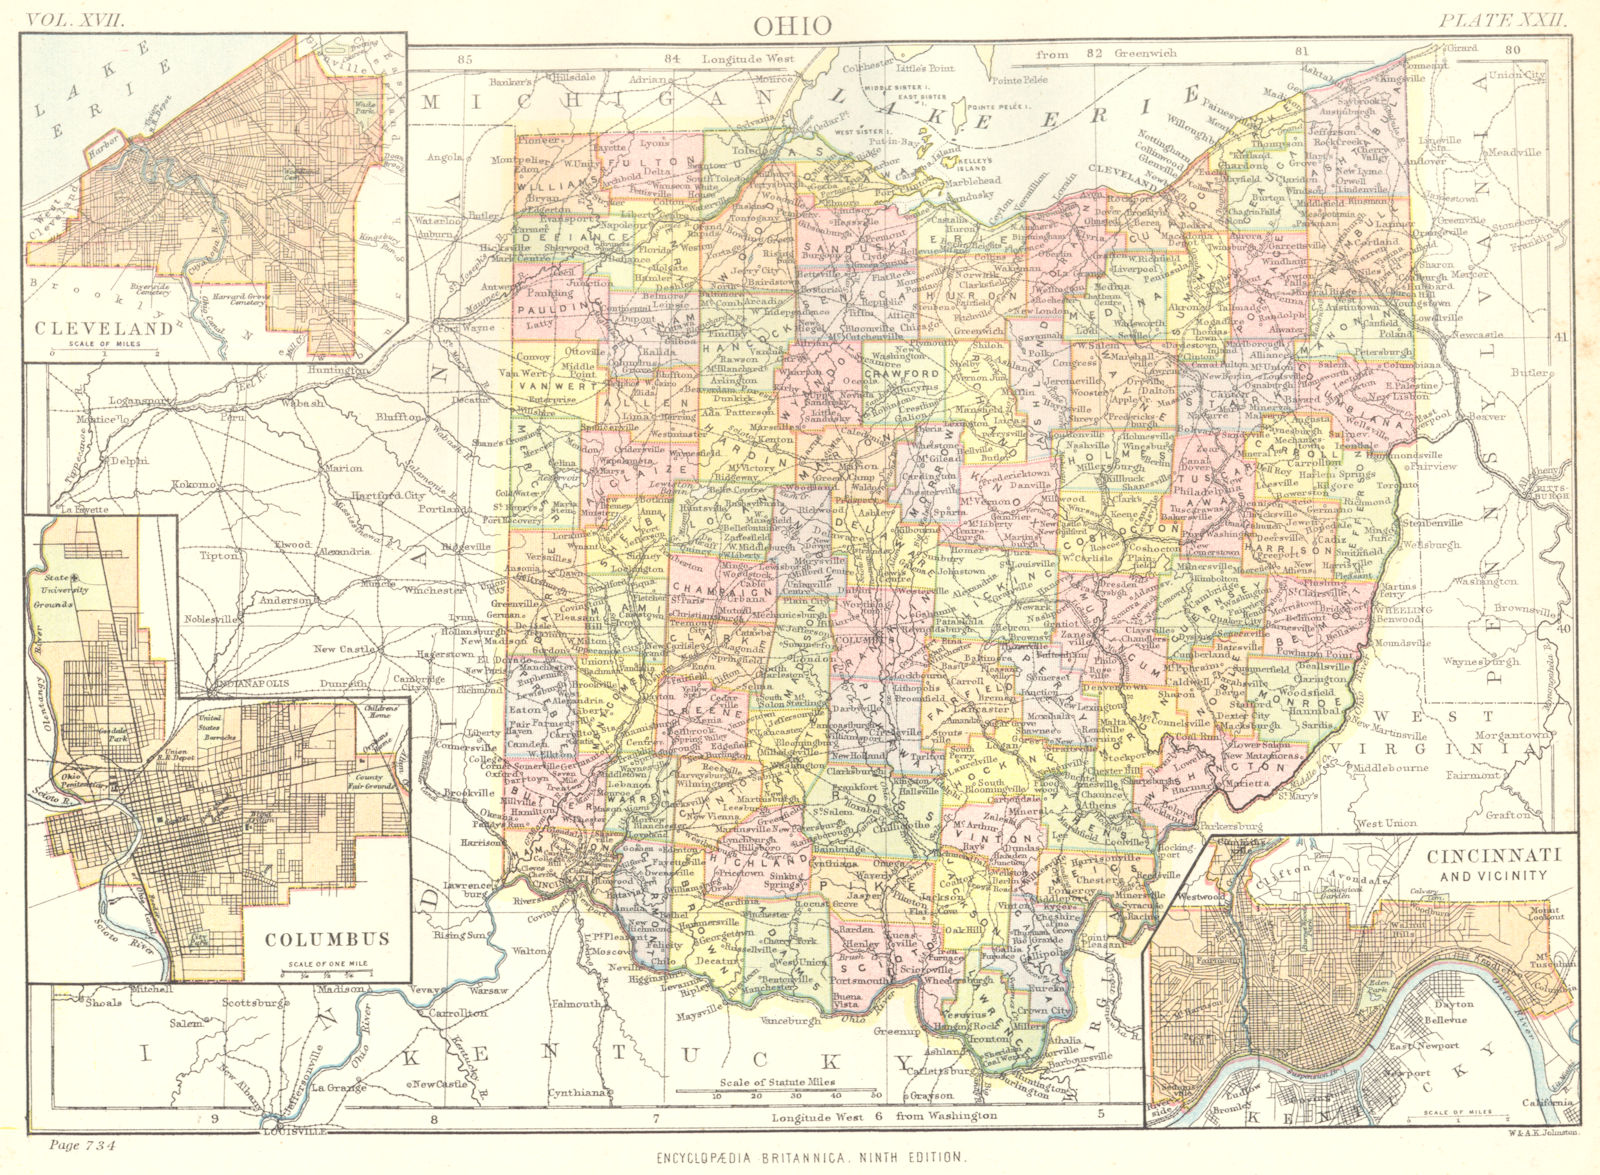 OHIO. State map showing counties. Inset Cleveland; Columbus; Cincinnati 1898